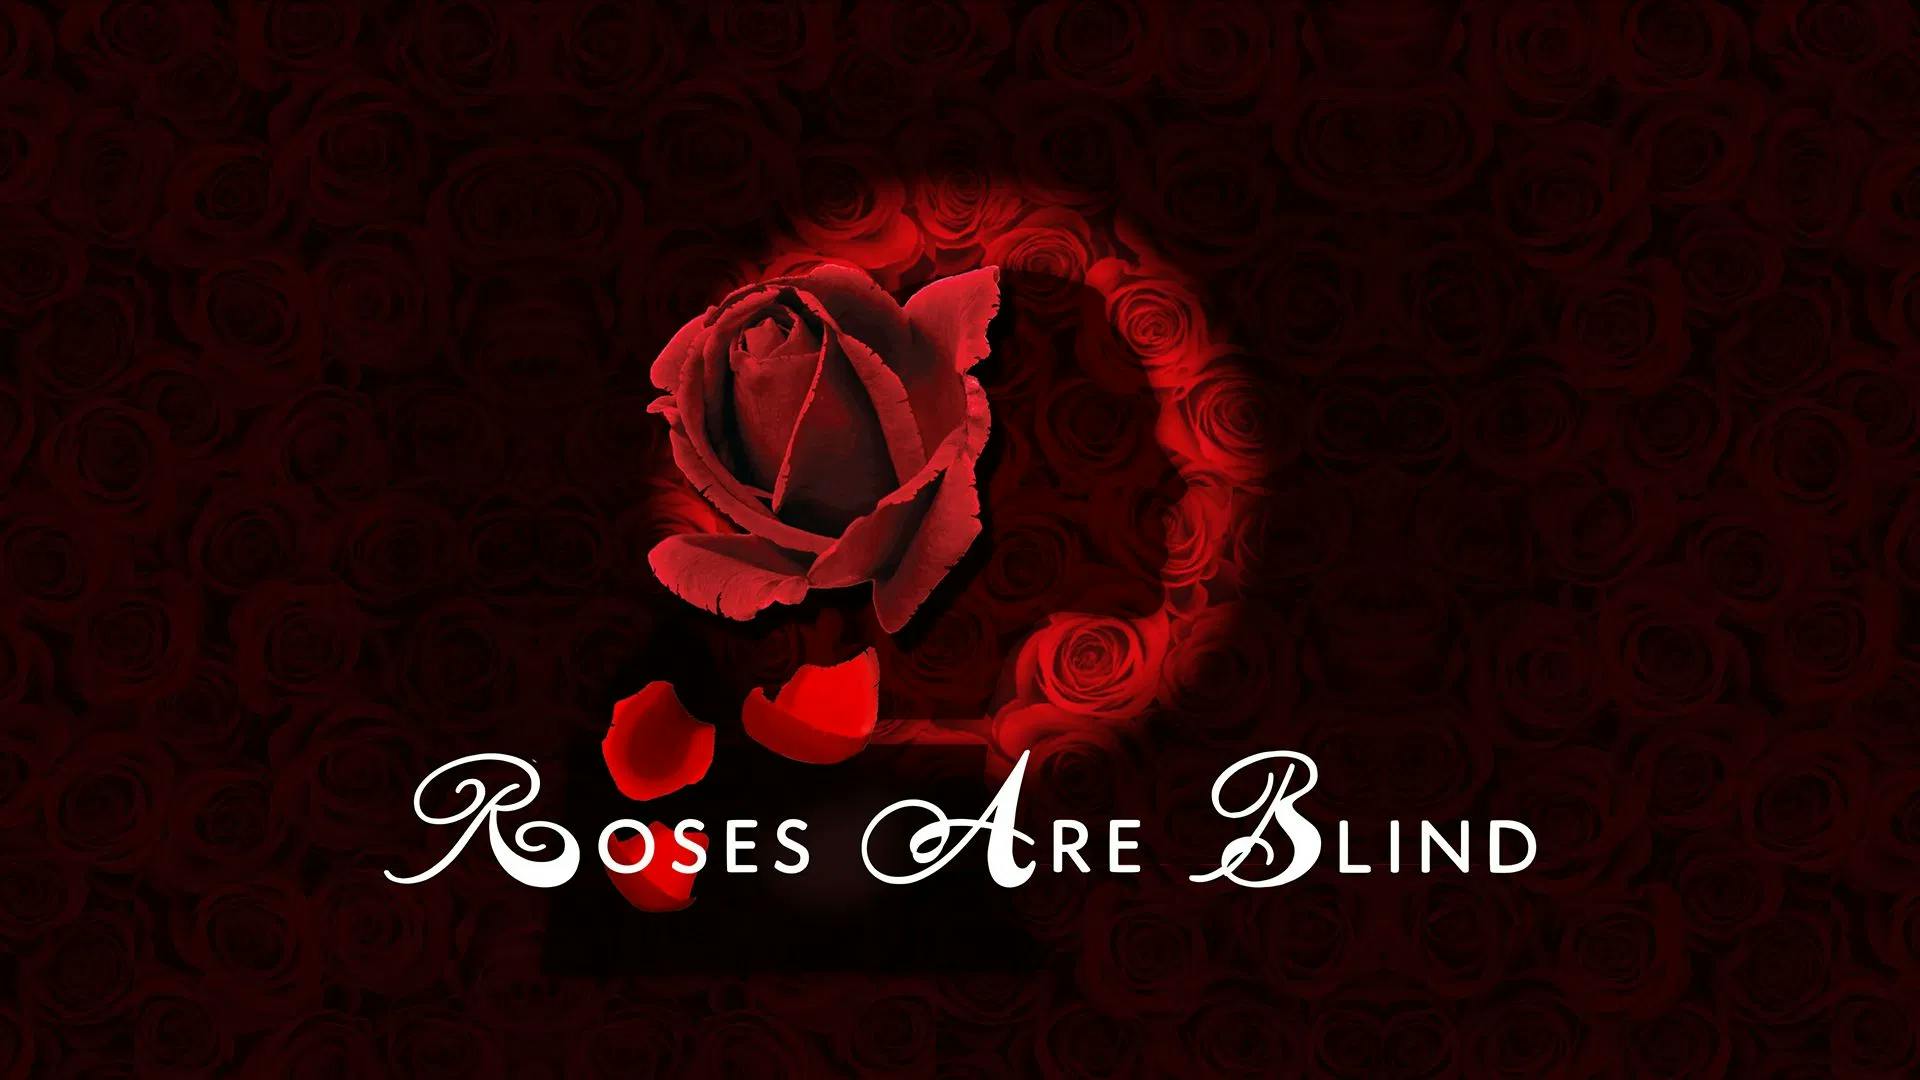 Roses are Blind